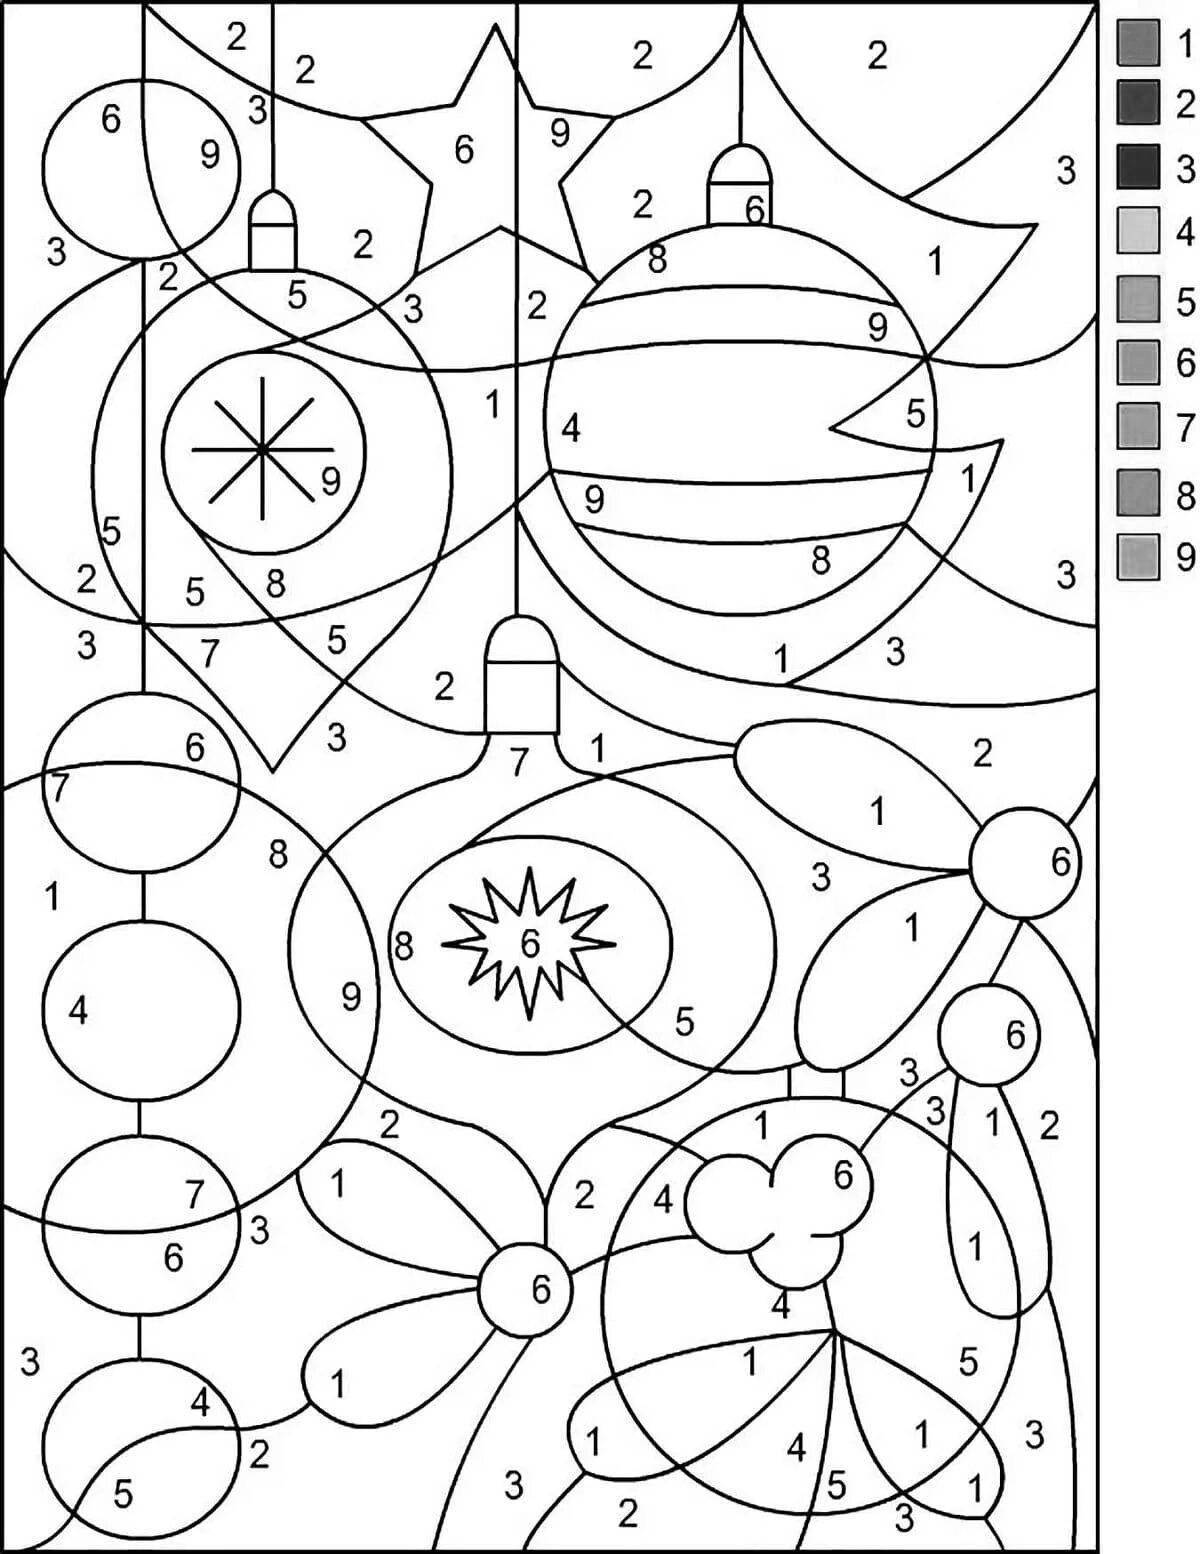 Outstanding cell and number coloring game